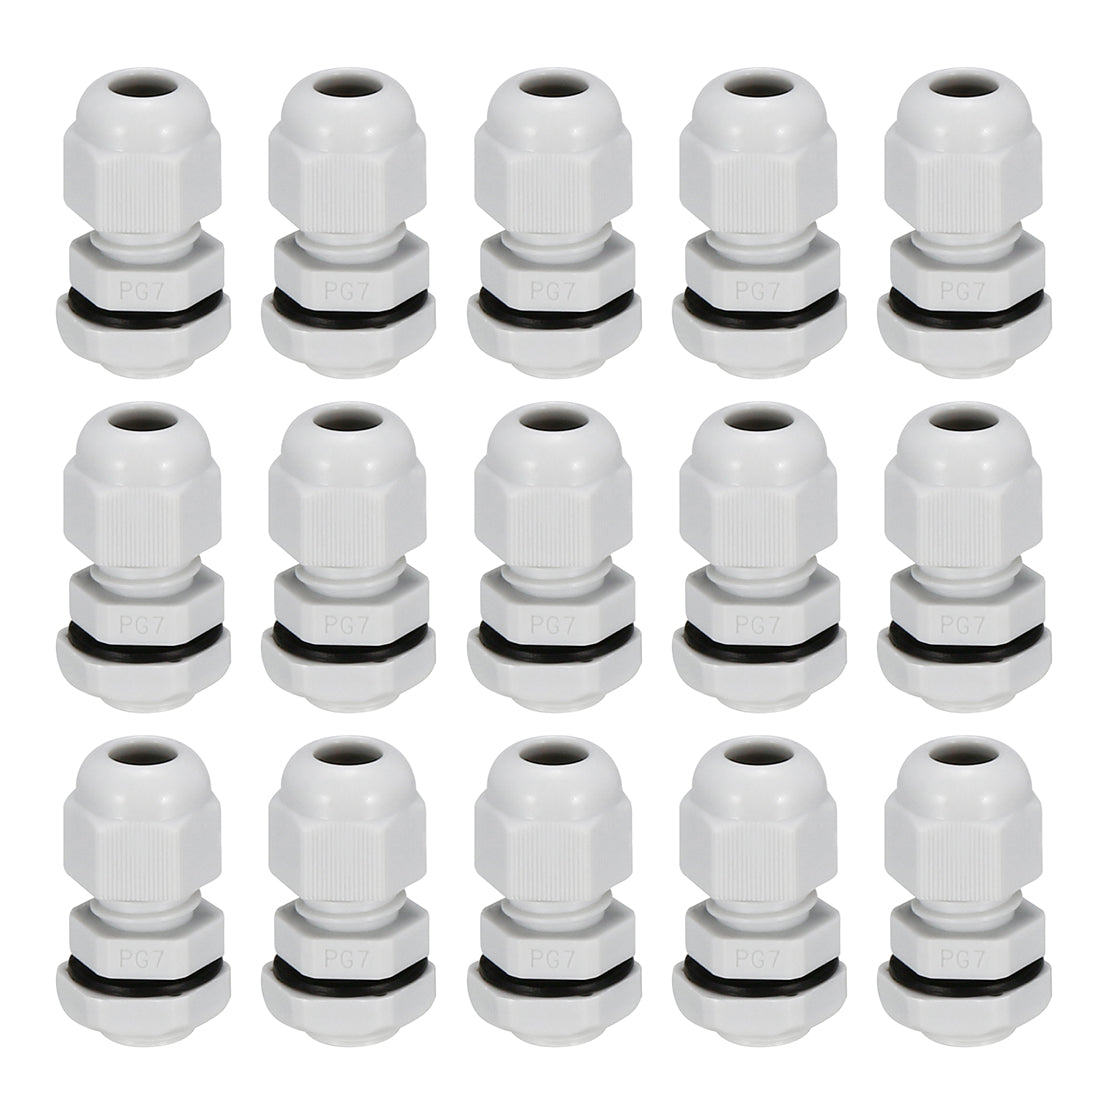 uxcell Uxcell PG7 Cable Gland Waterproof Plastic Joint Adjustable Locknut White for 3mm-6.5mm Dia Cable Wire 15 Pcs